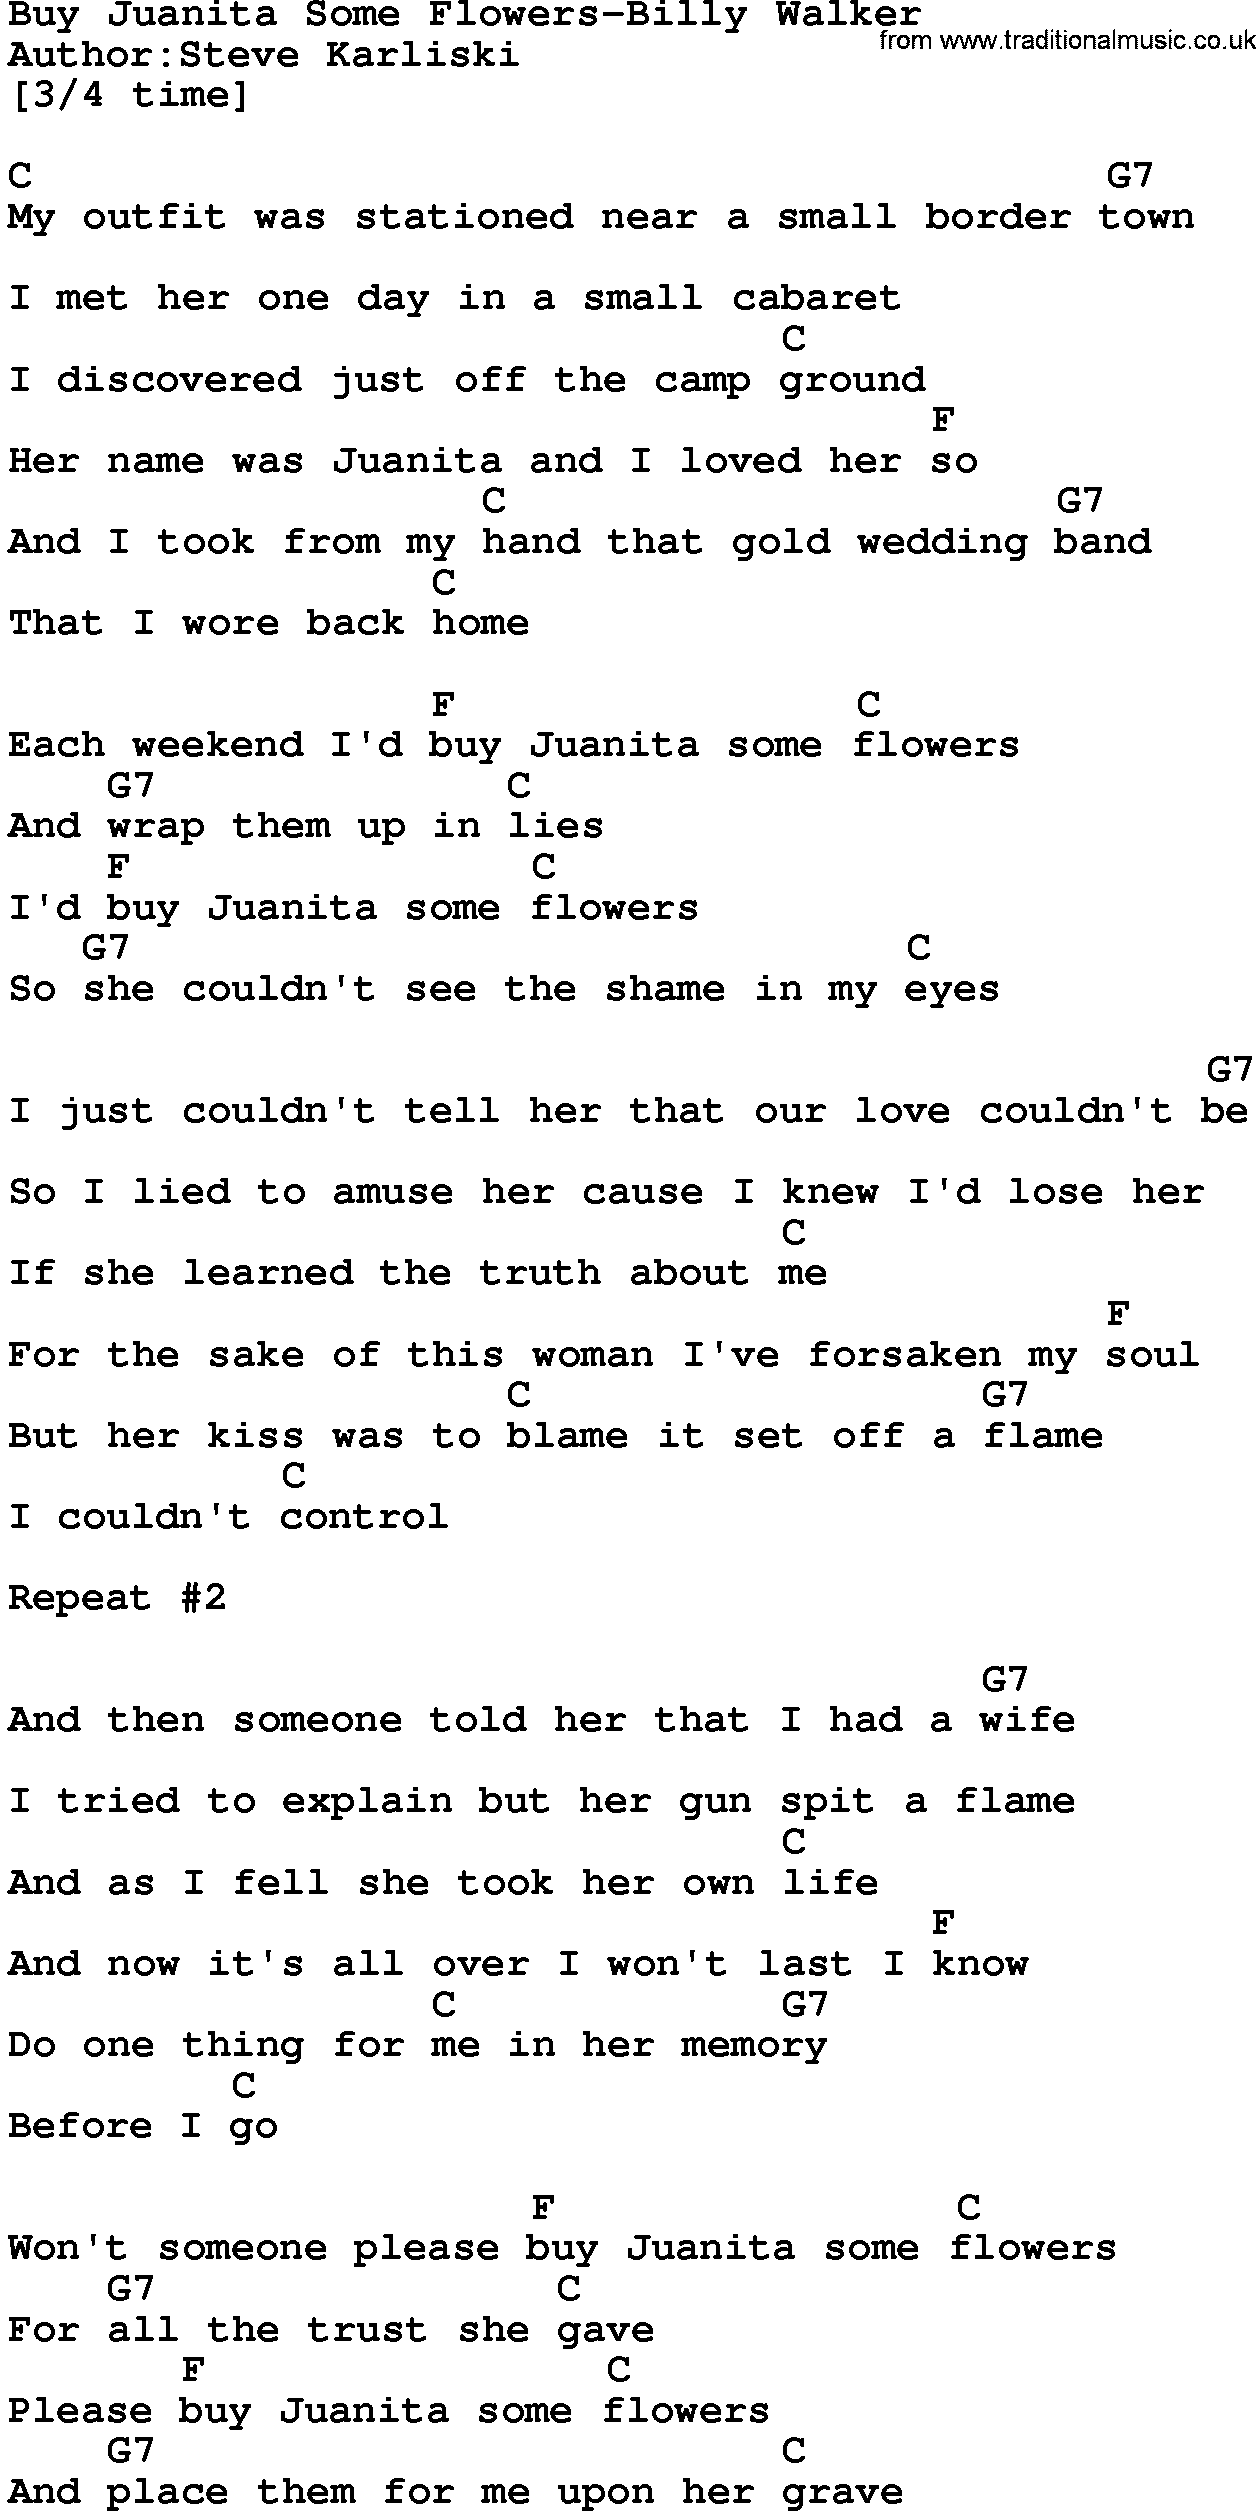 Country music song: Buy Juanita Some Flowers-Billy Walker lyrics and chords